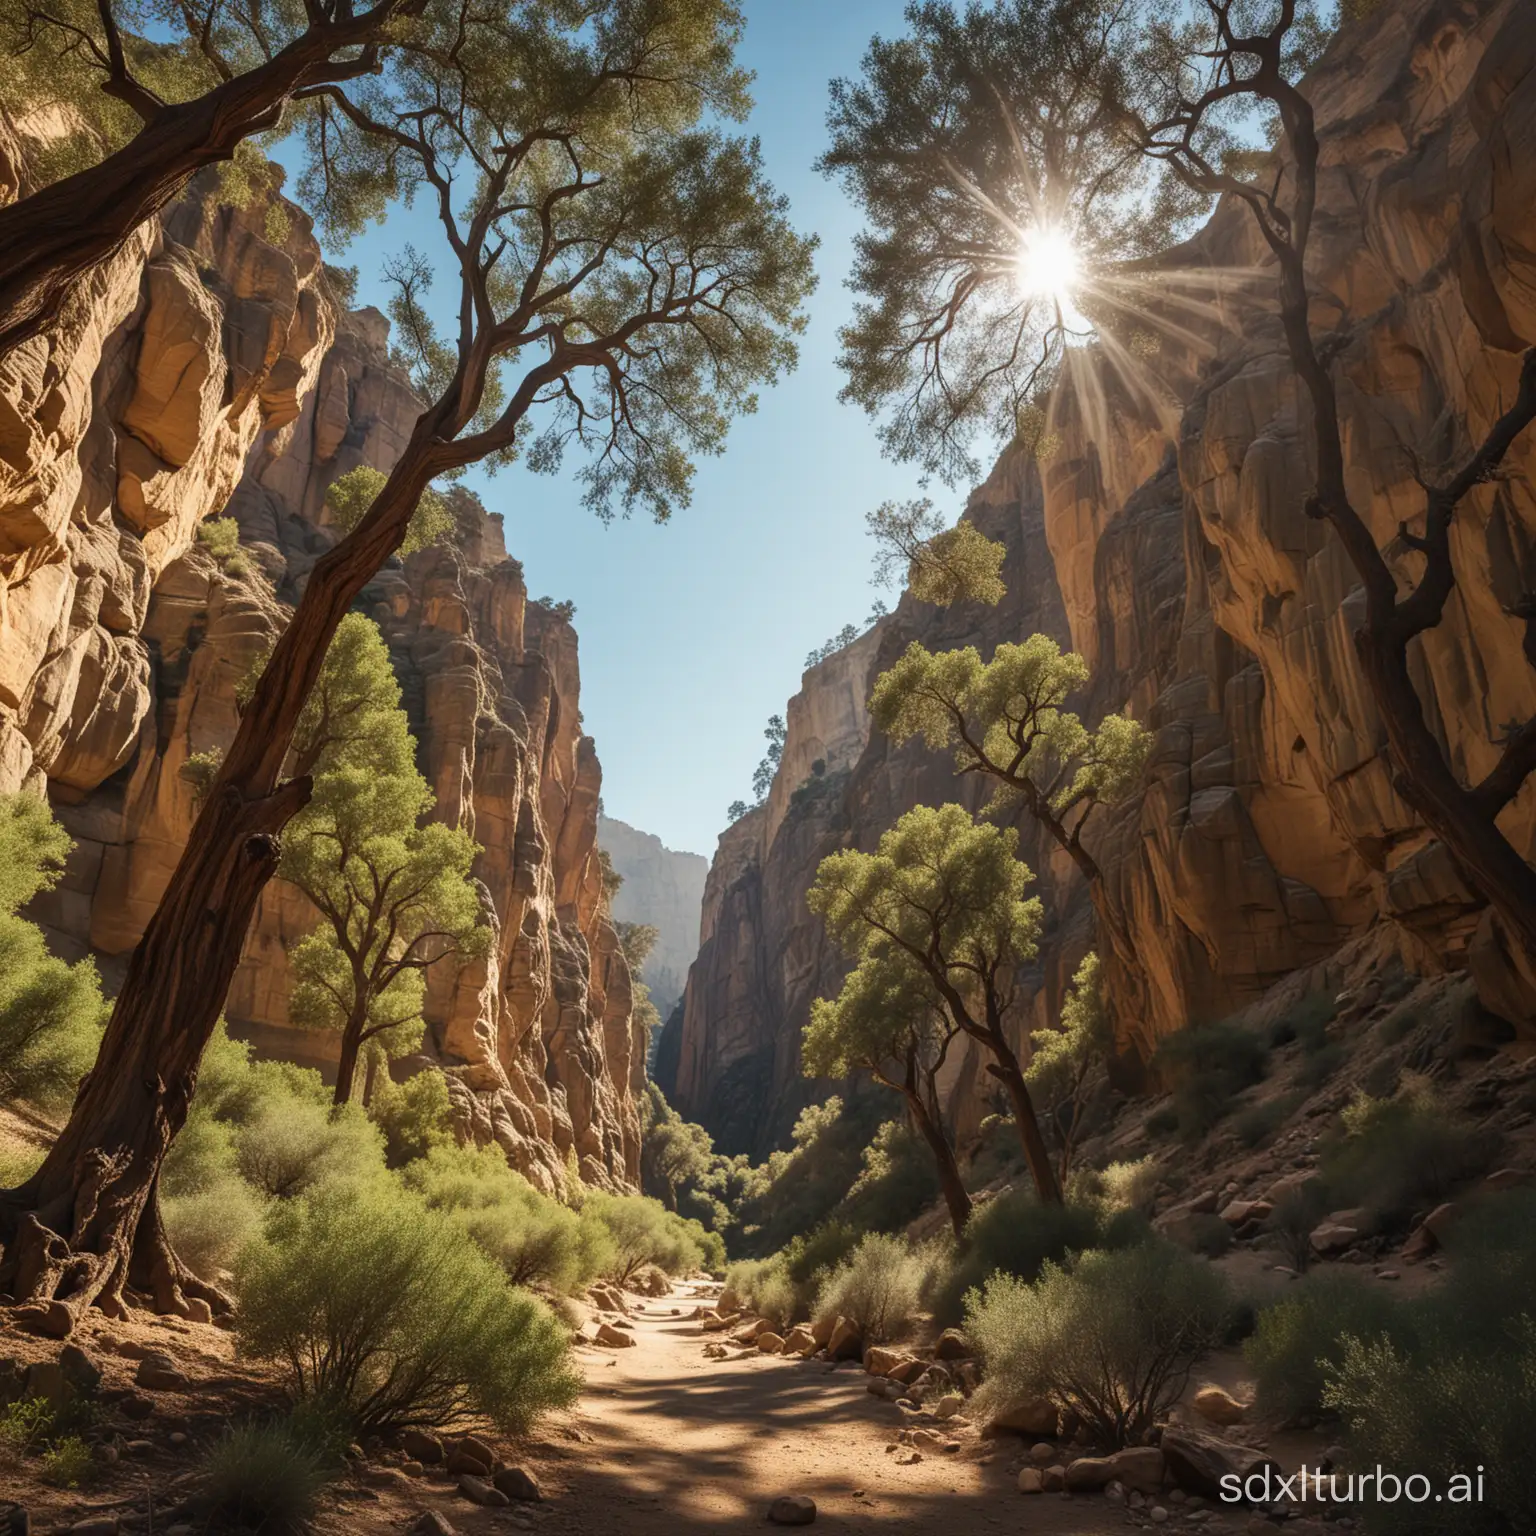 ``` /imagine prompt: A majestic canyon in California framed by towering trees beneath clear skies, rugged yet scenic, nature, landscape, sylvan, sunlight, olive trees, Sony A7R III, f/1.8 lens, landscape format, --style raw --stylize 150 --ar 16:9 --v 6 ```